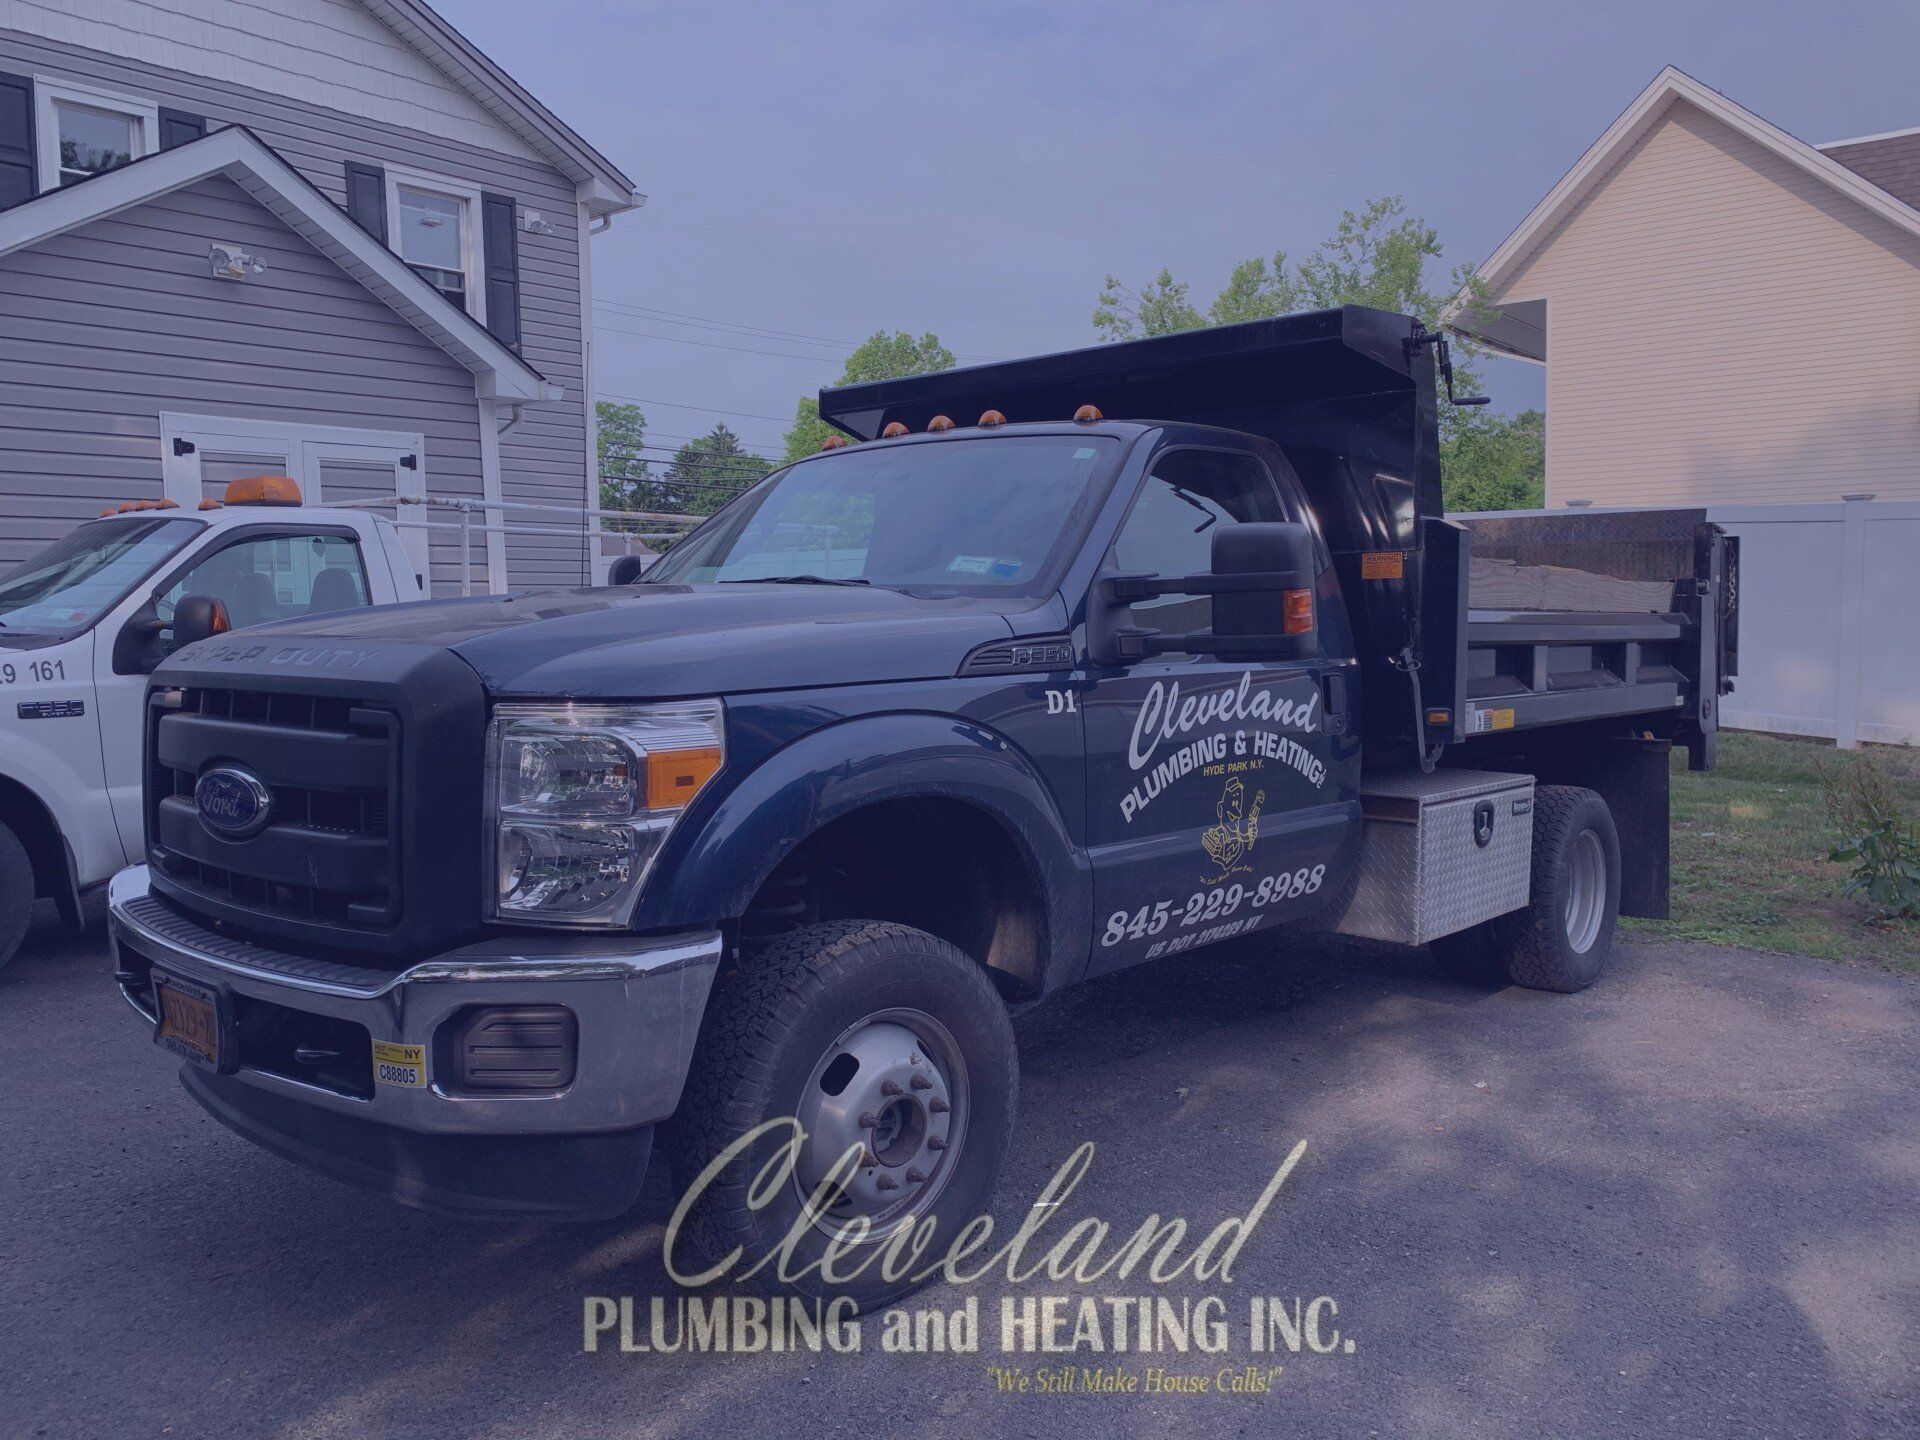 Large Pick-up Truck — Hyde Park, NY — Cleveland Plumbing & Heating Inc.